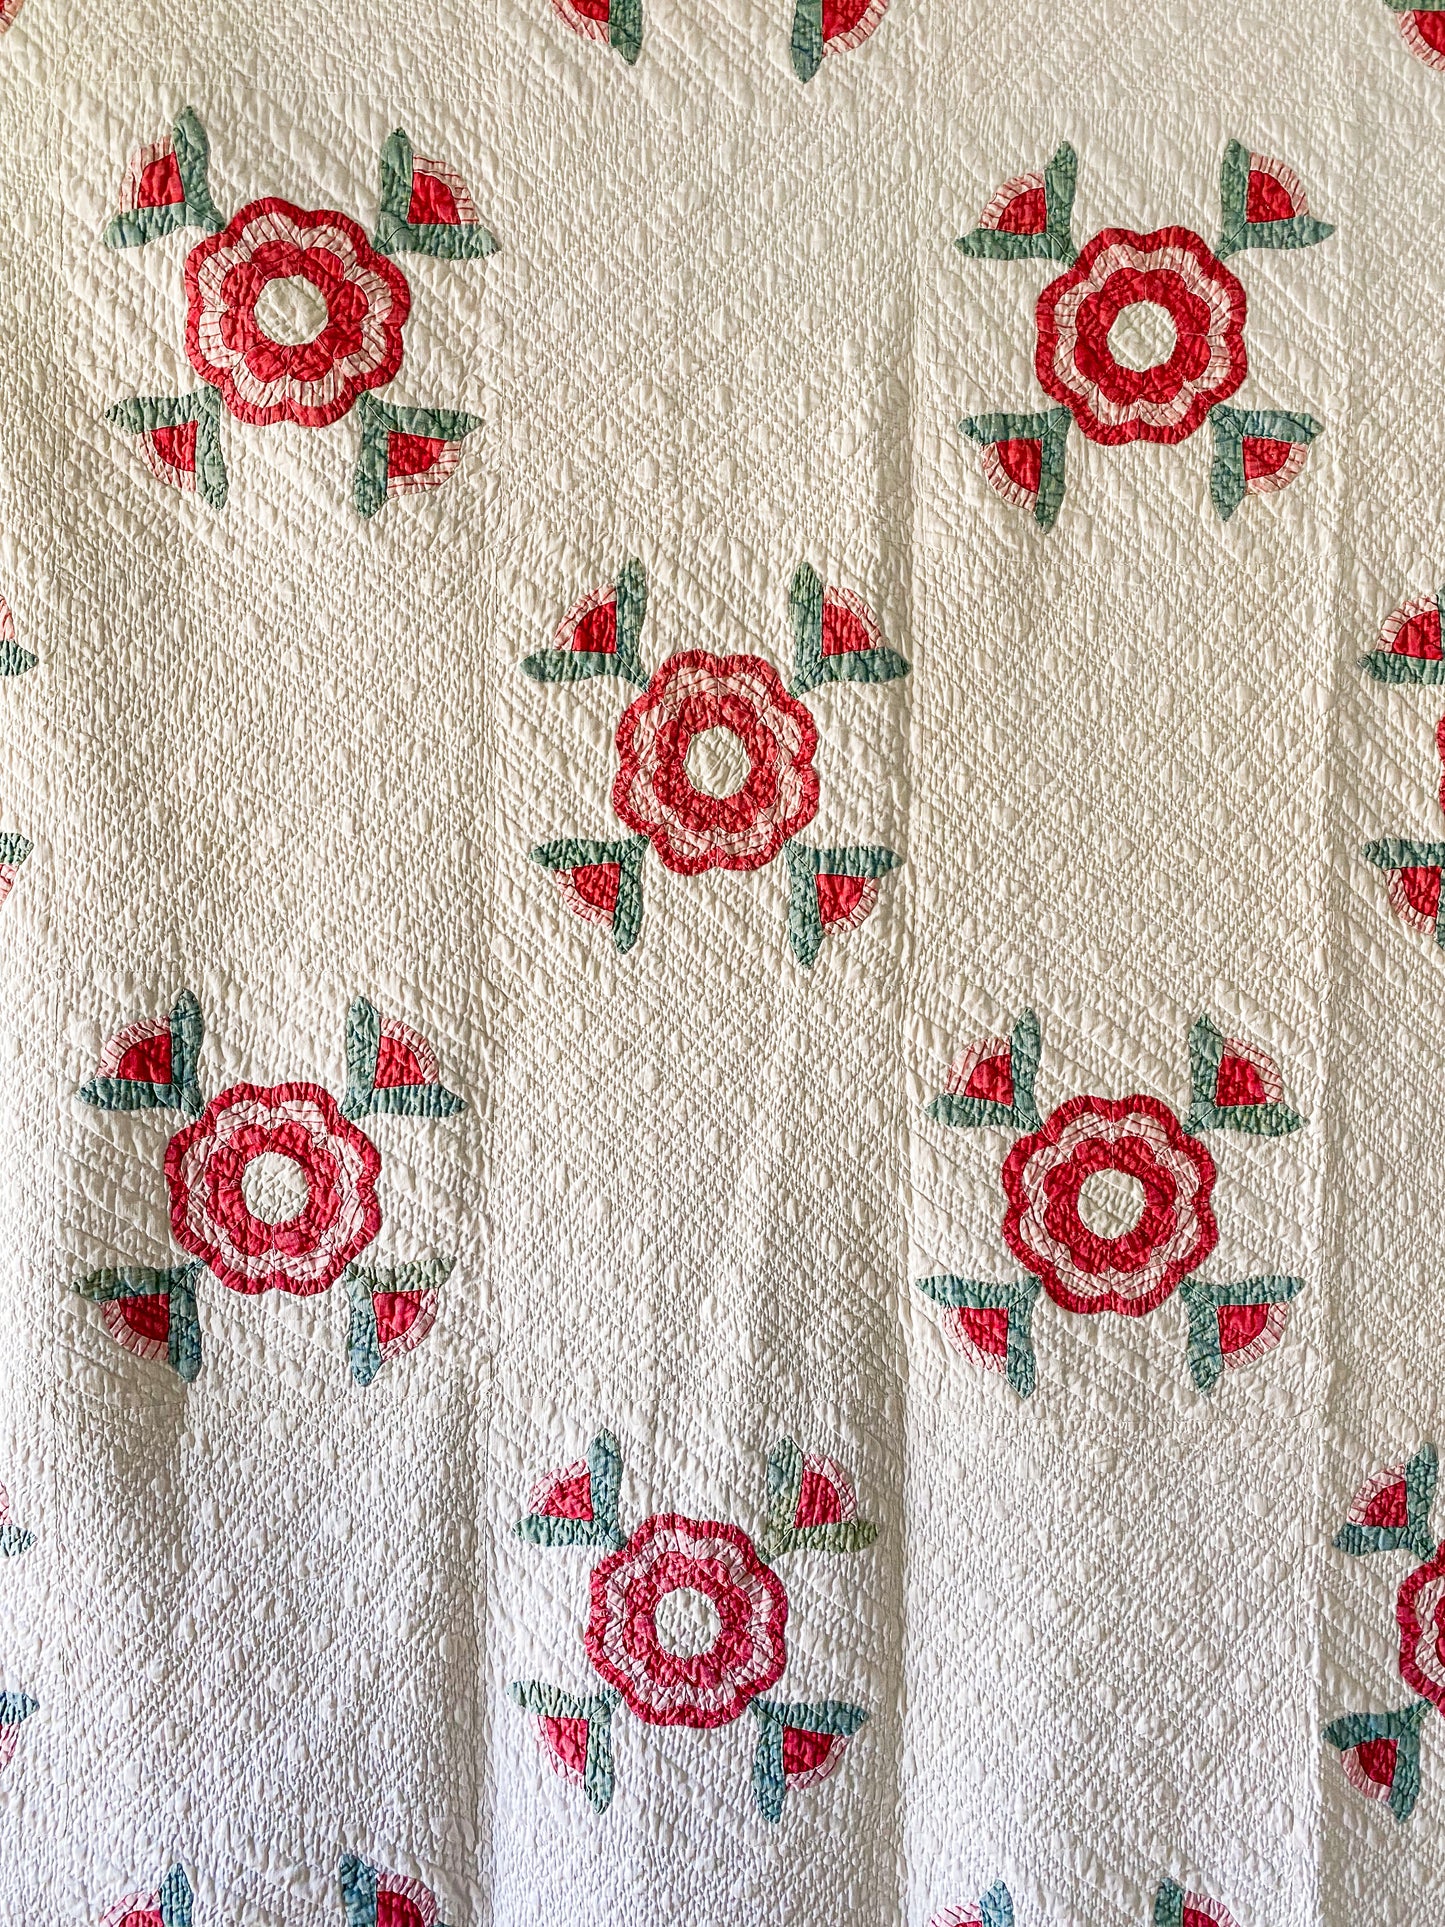 Antique Red and Overdye Green California Rose Applique Quilt c1880s, 90" x 67"